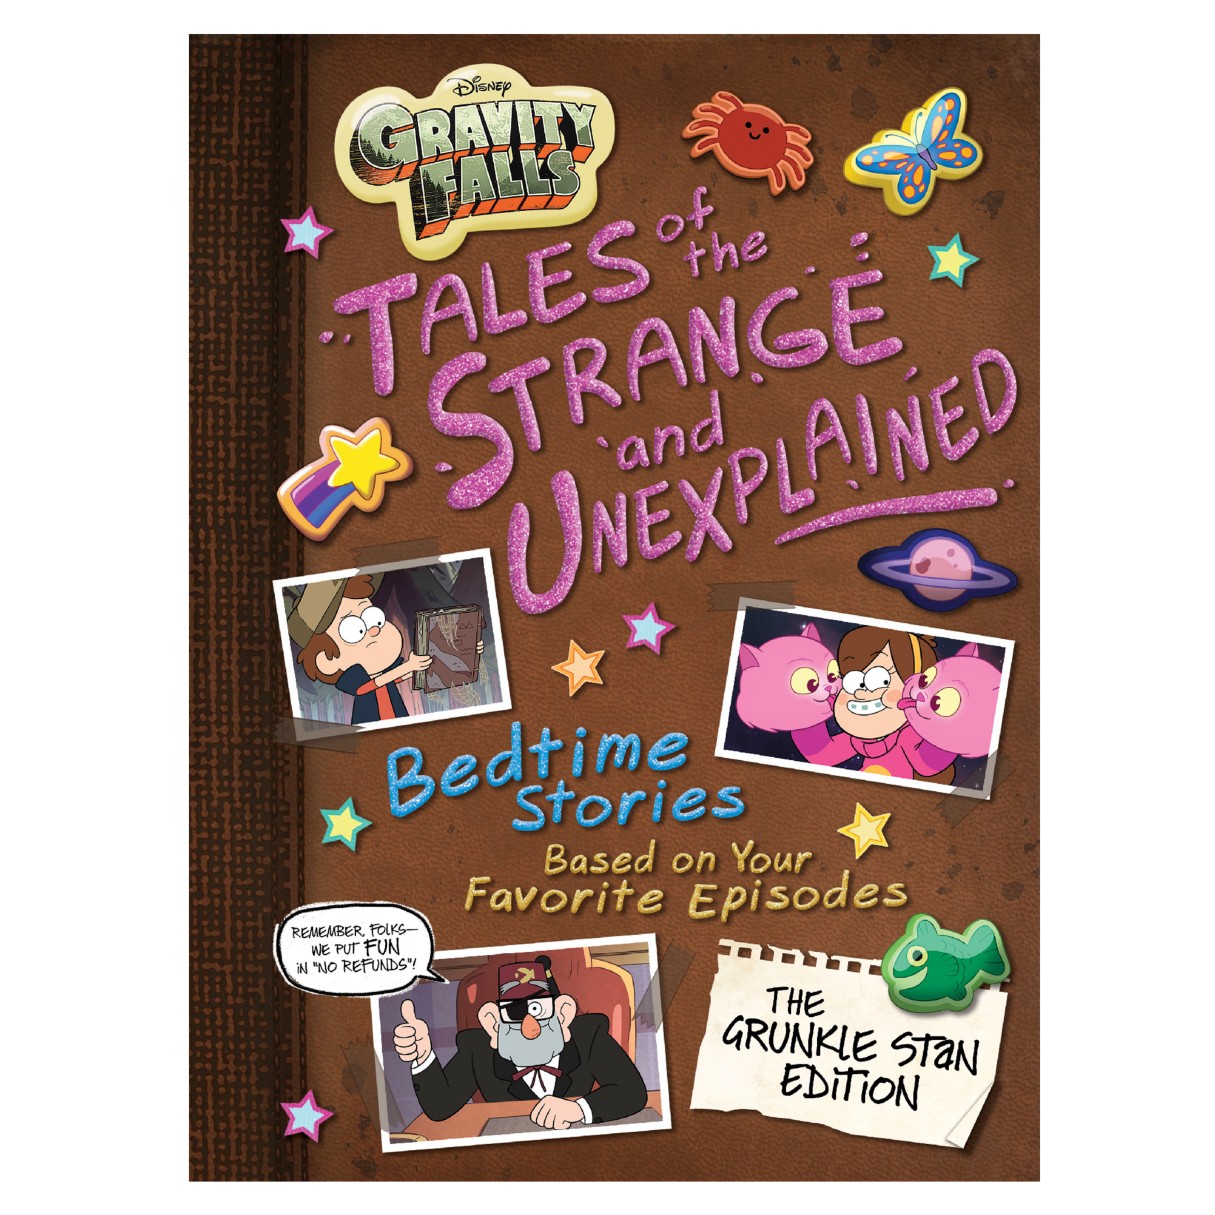 Gravity Falls: Tales of the Strange and Unexplained Book